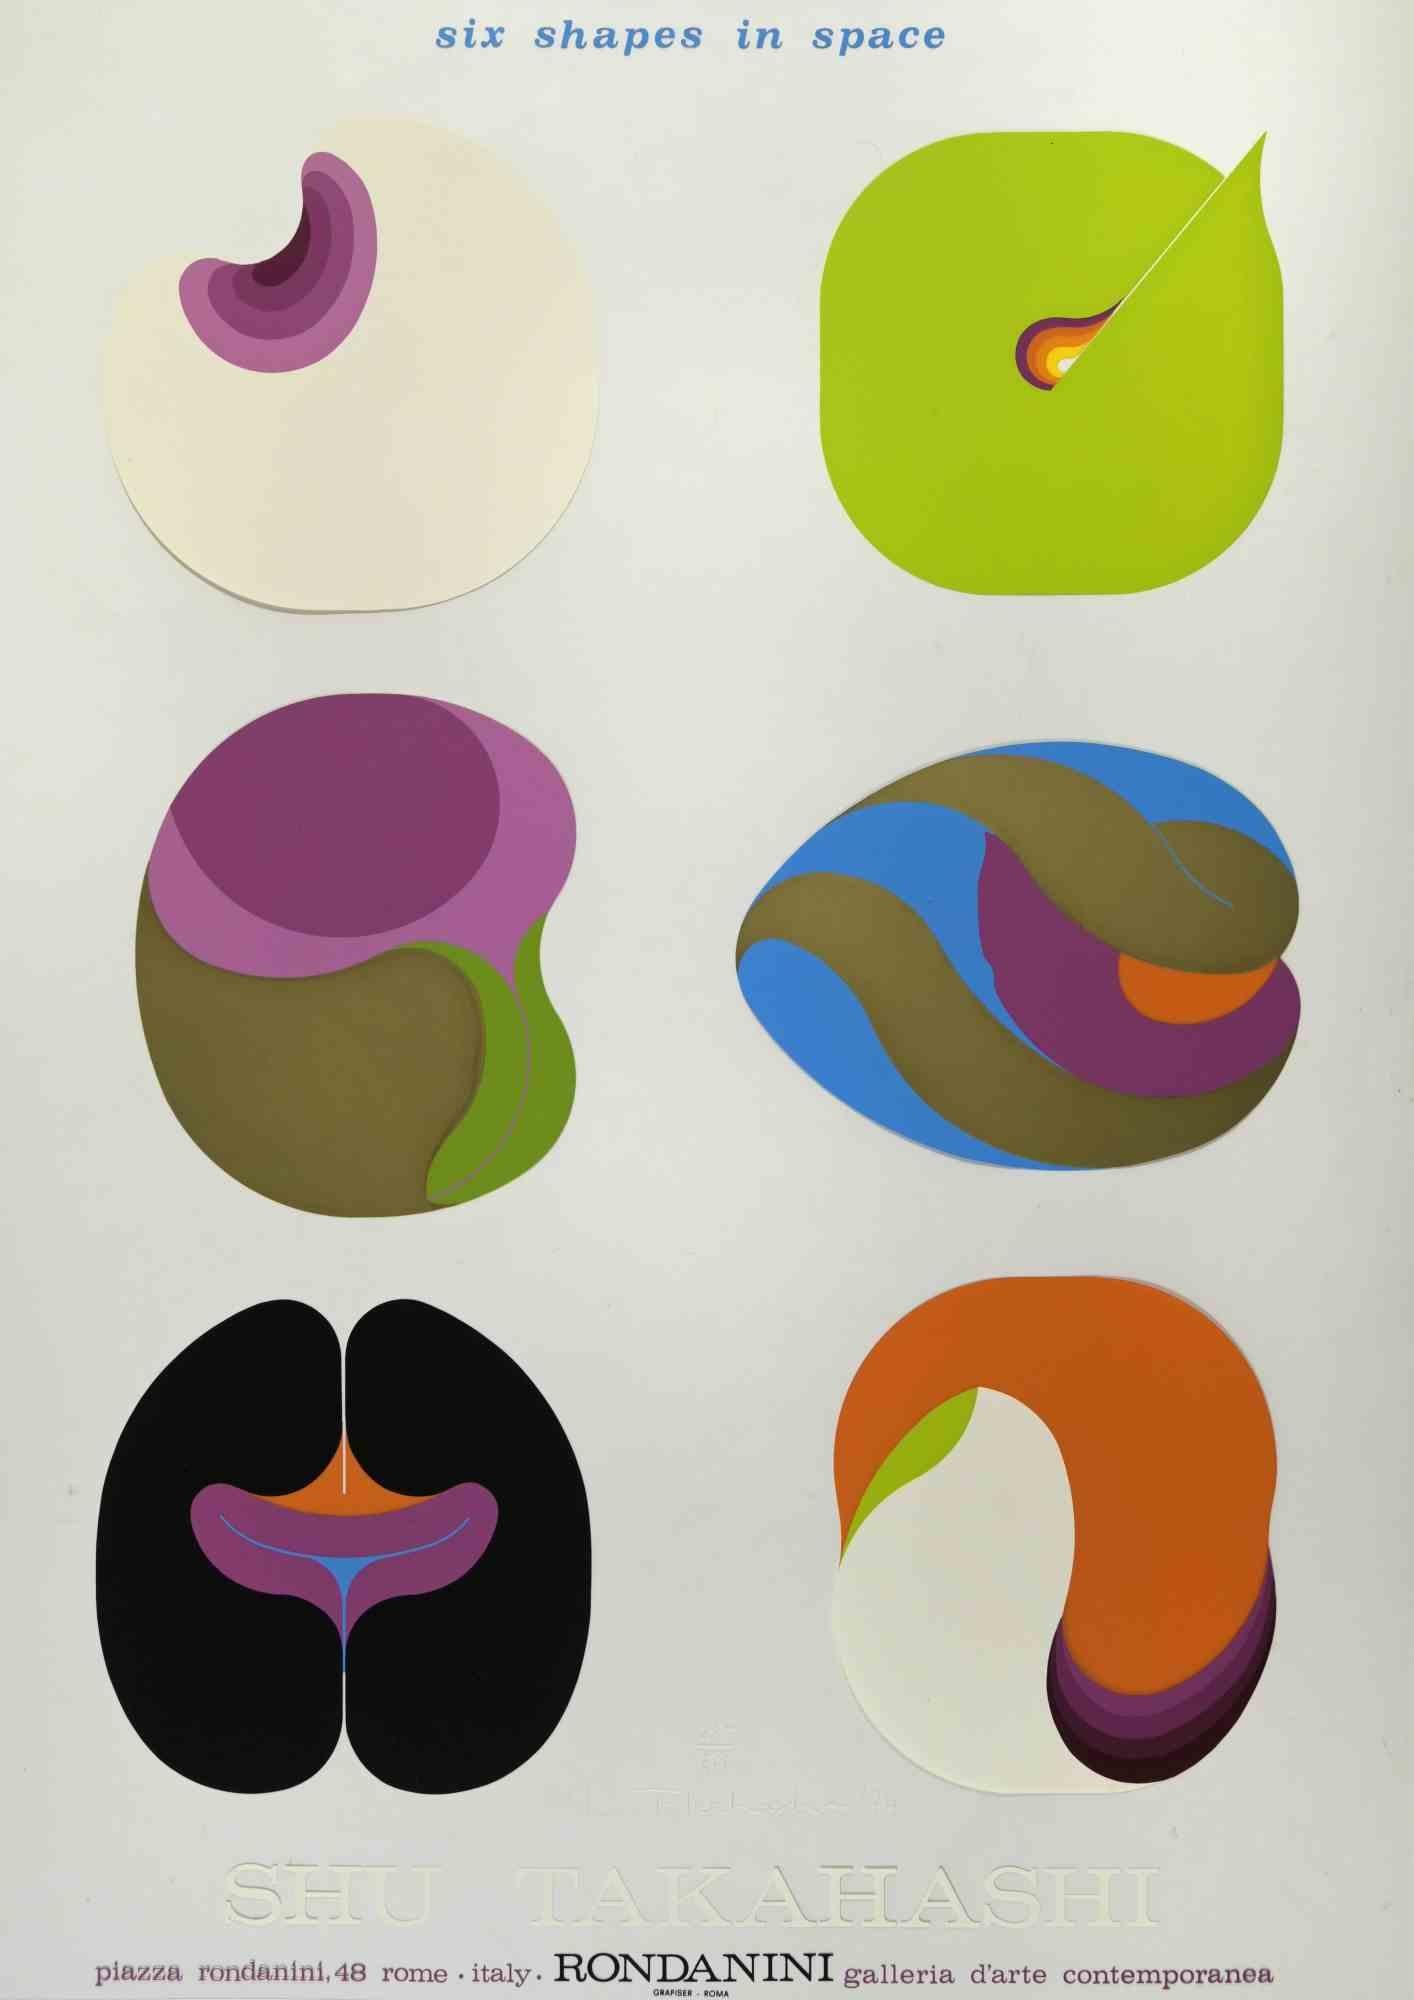 Shu Takahashi Abstract Print - Six Shapes in Space - Mixed Media by S. Takahashi - 1974